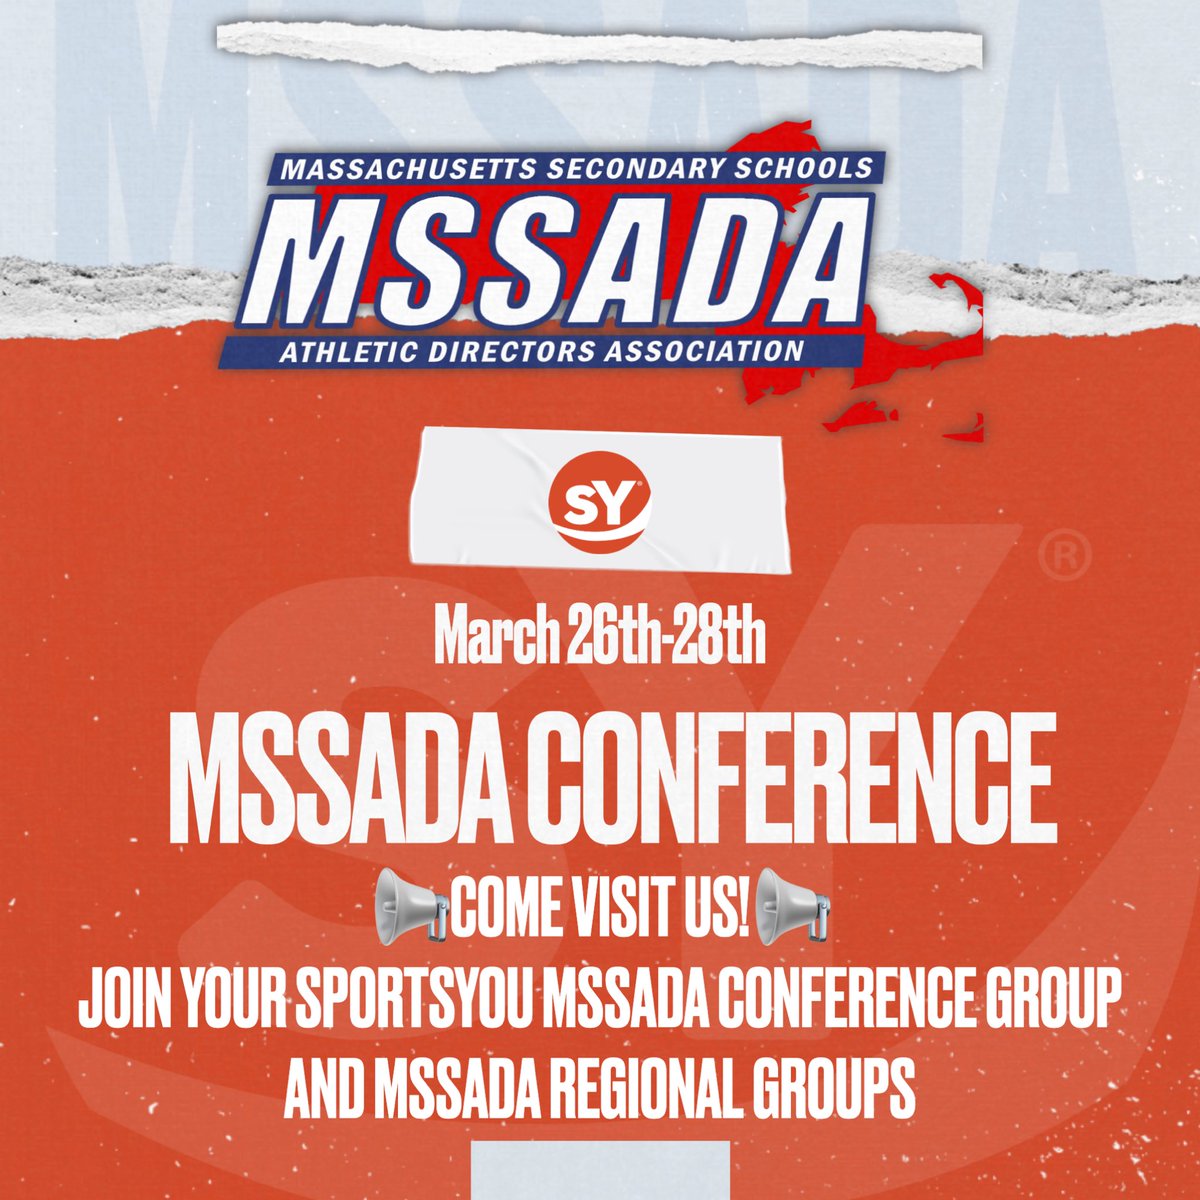 sportsYou is attending the 2024 MSSADA Conference!! Come visit Booth 15 to learn more about how to join your MSSADA conference group and MSSADA regional groups through sportsYou!! Elevate Coaches & Culture through great sports communication! #coach #athleticdirector